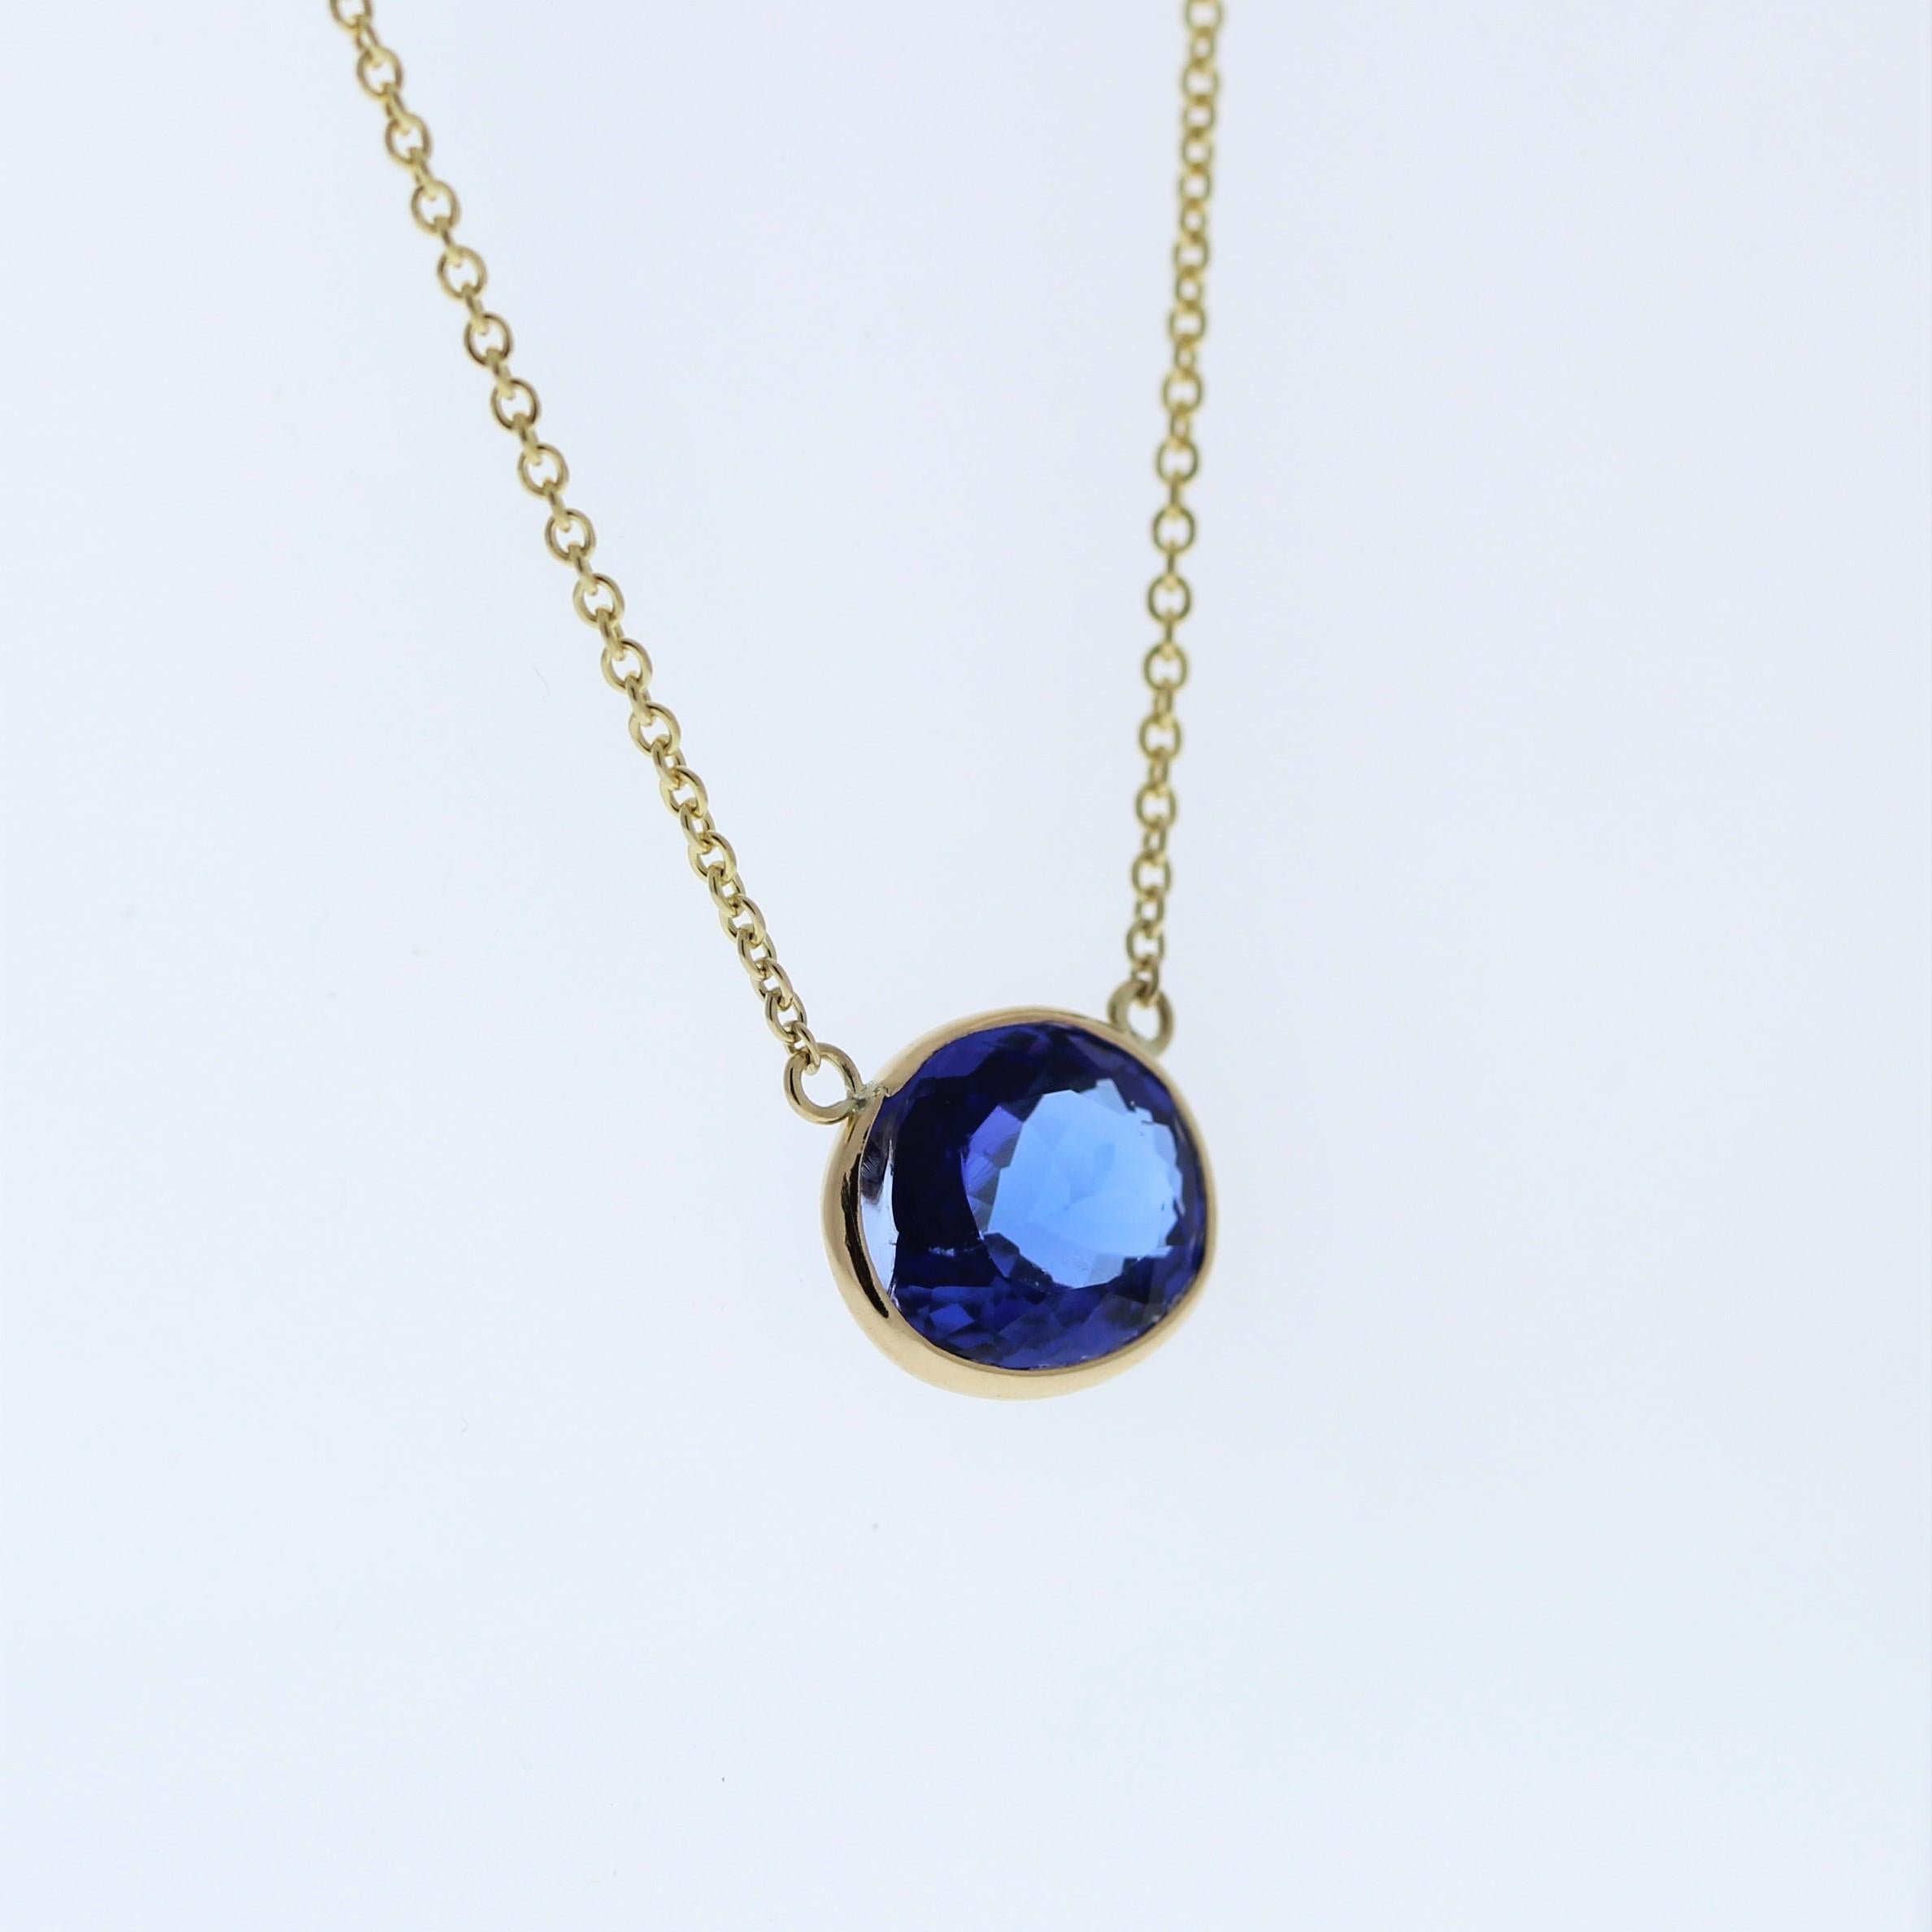 The necklace features a 3.18-carat oval-cut tanzanite set in a 14 karat yellow gold pendant or setting. The oval cut and the mesmerizing blue-violet color of the tanzanite against the yellow gold setting are likely to create a luxurious and